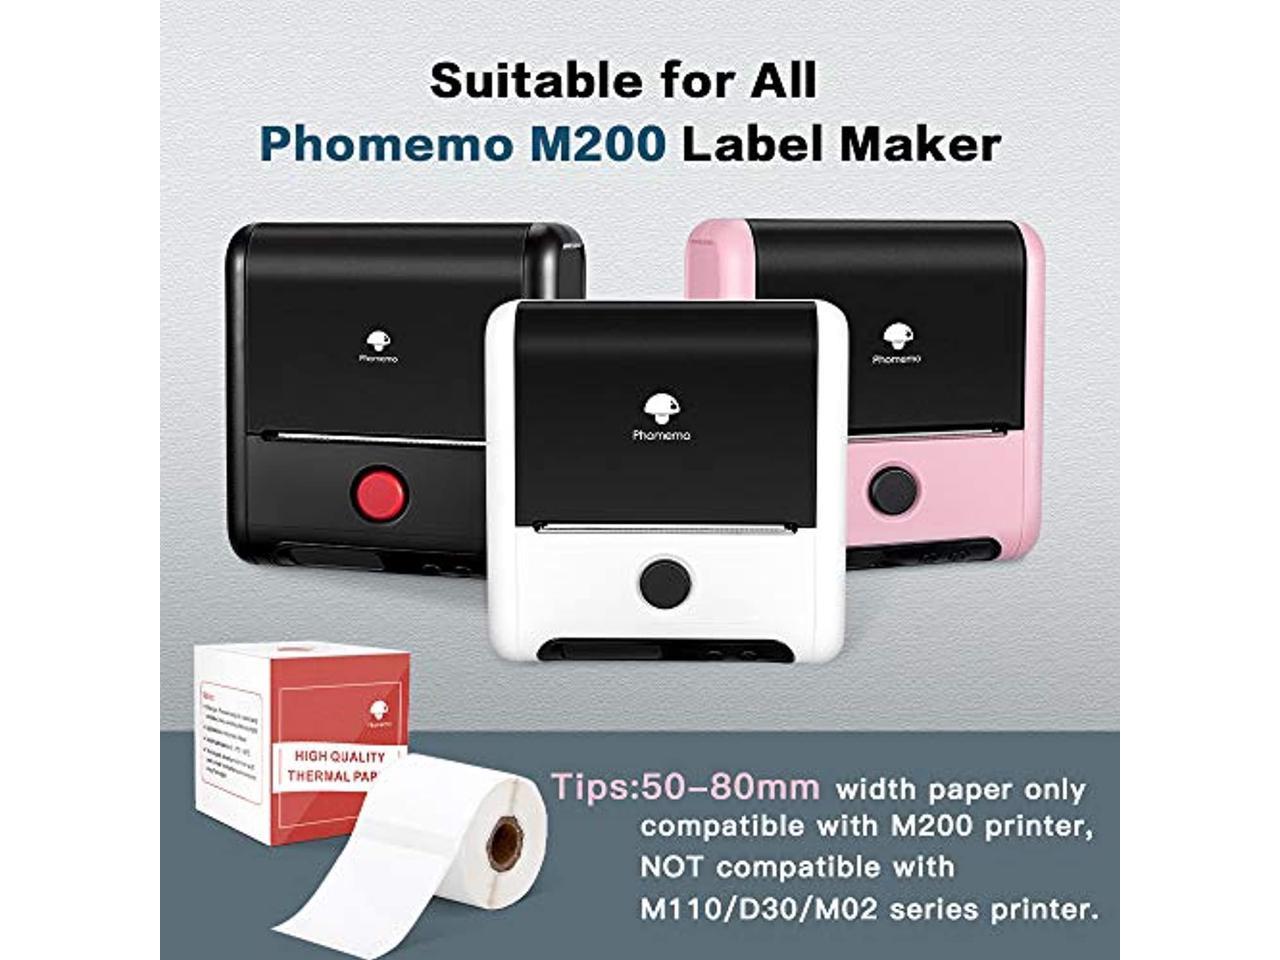 Phomemo Multi-Purpose Clear Self-Adhesive Label for Phomemo M200/M110S Label Maker,1 1/2 X 1 1/8 40mm x 30mm 230 Labels/Roll,Black on Clear 